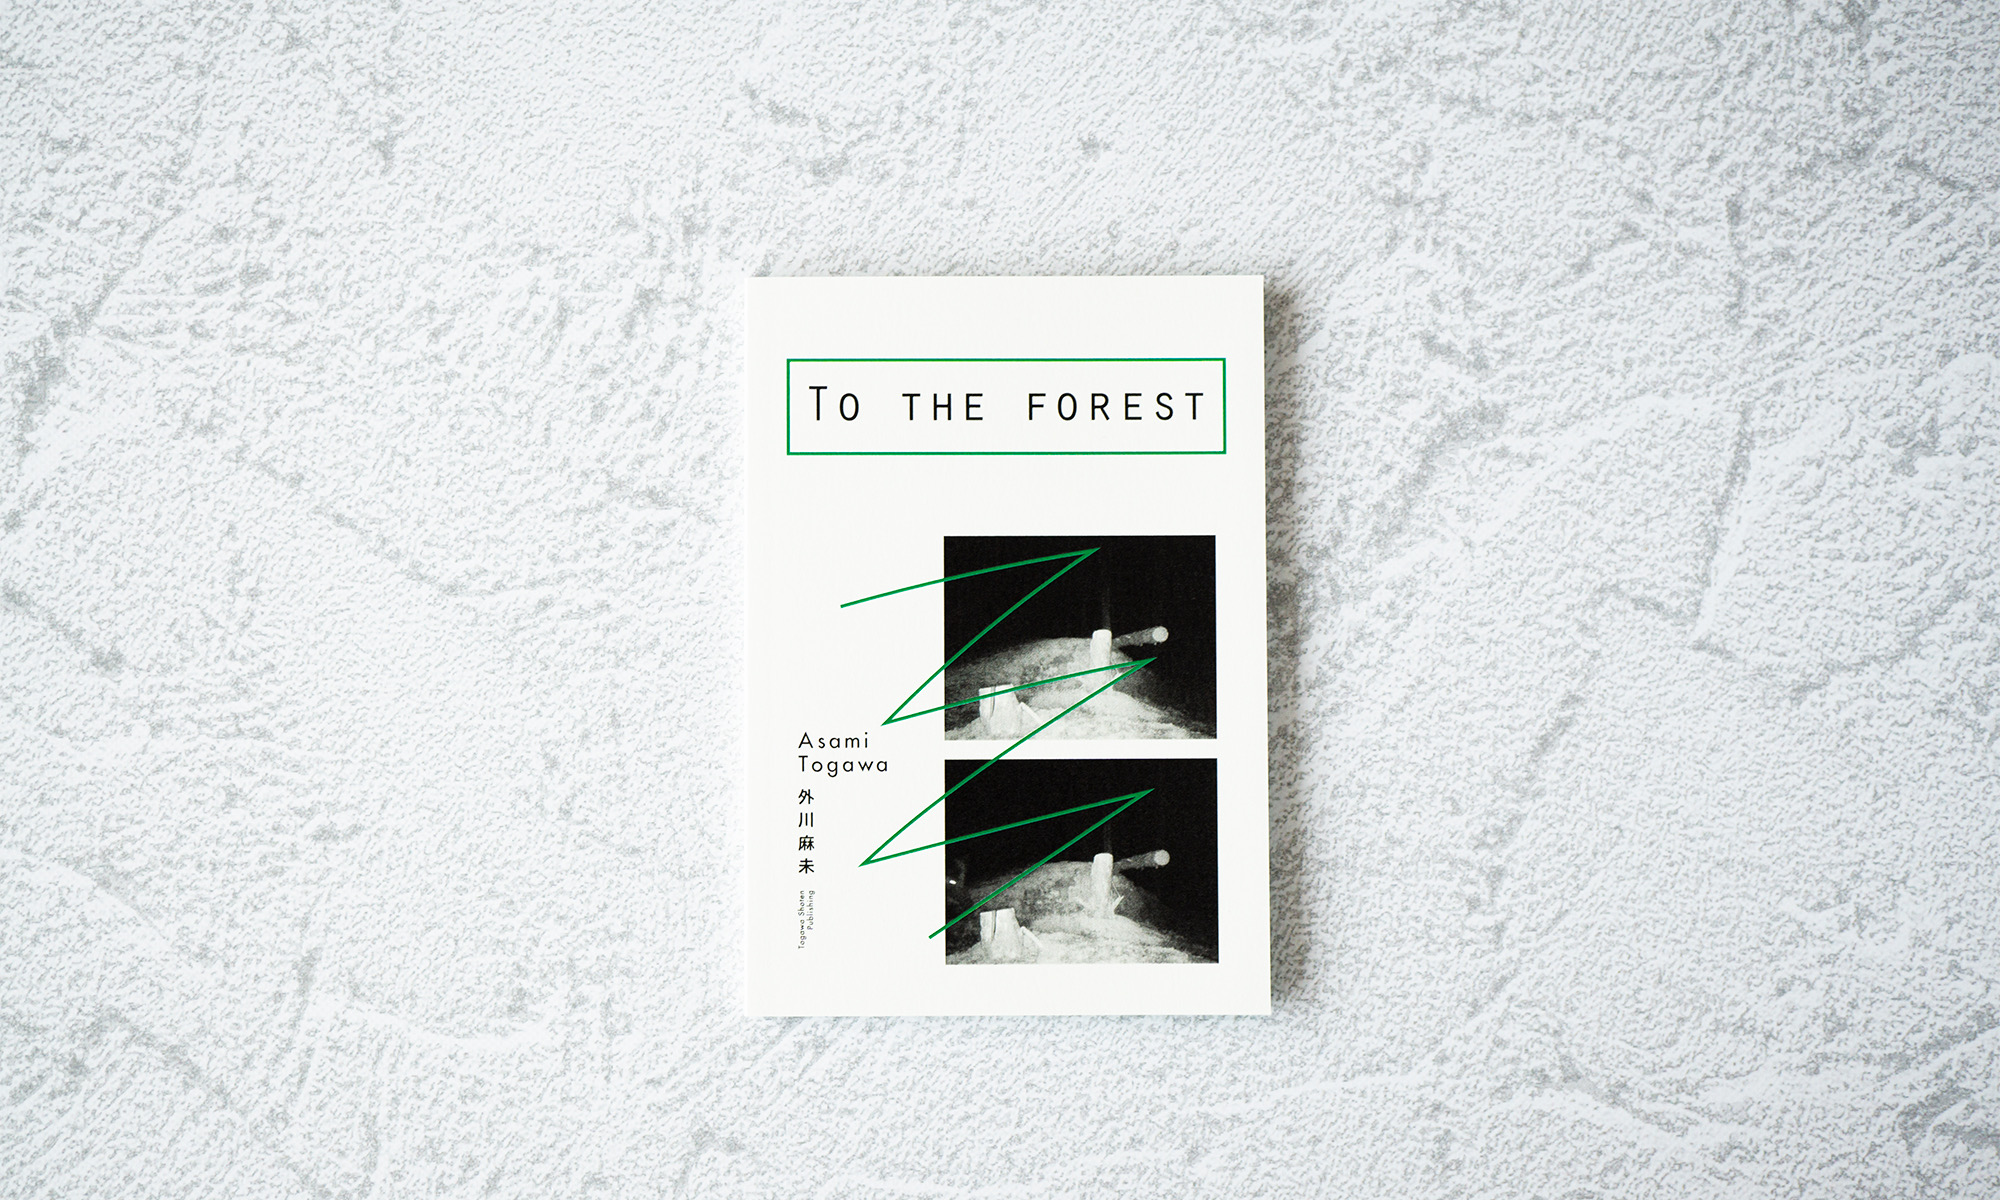 To the forest